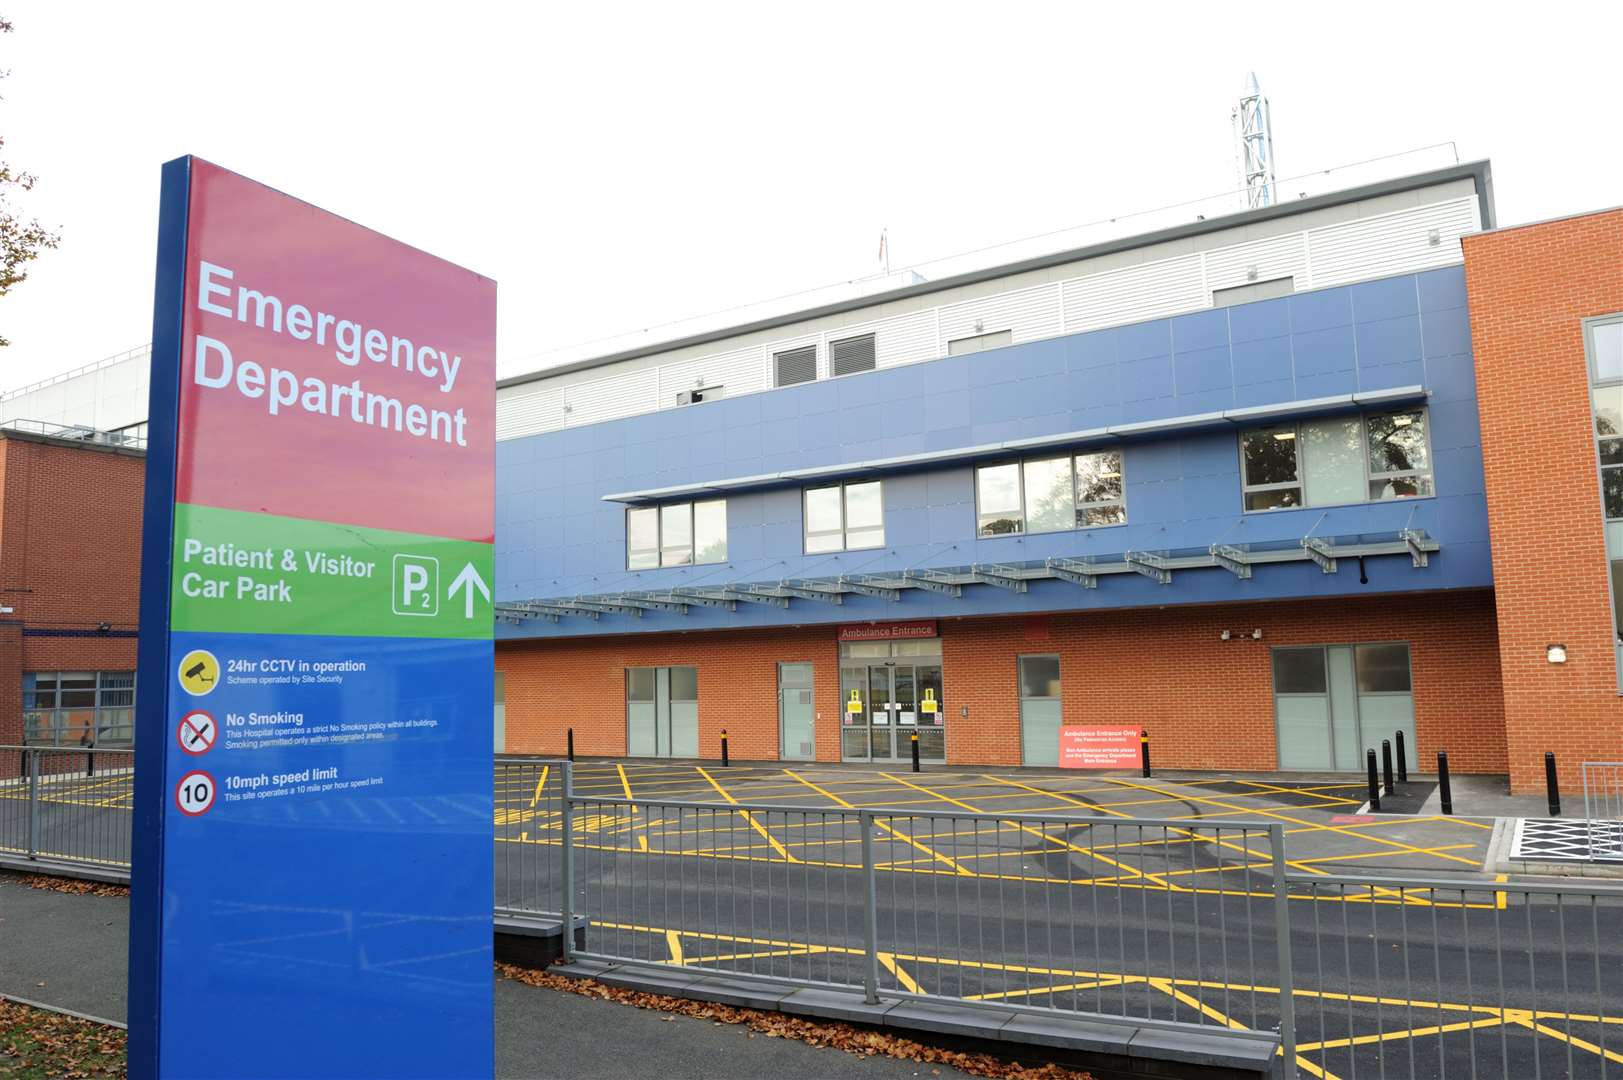 Medway Maritime Hospital has been given a requires improvement rating by the CQC